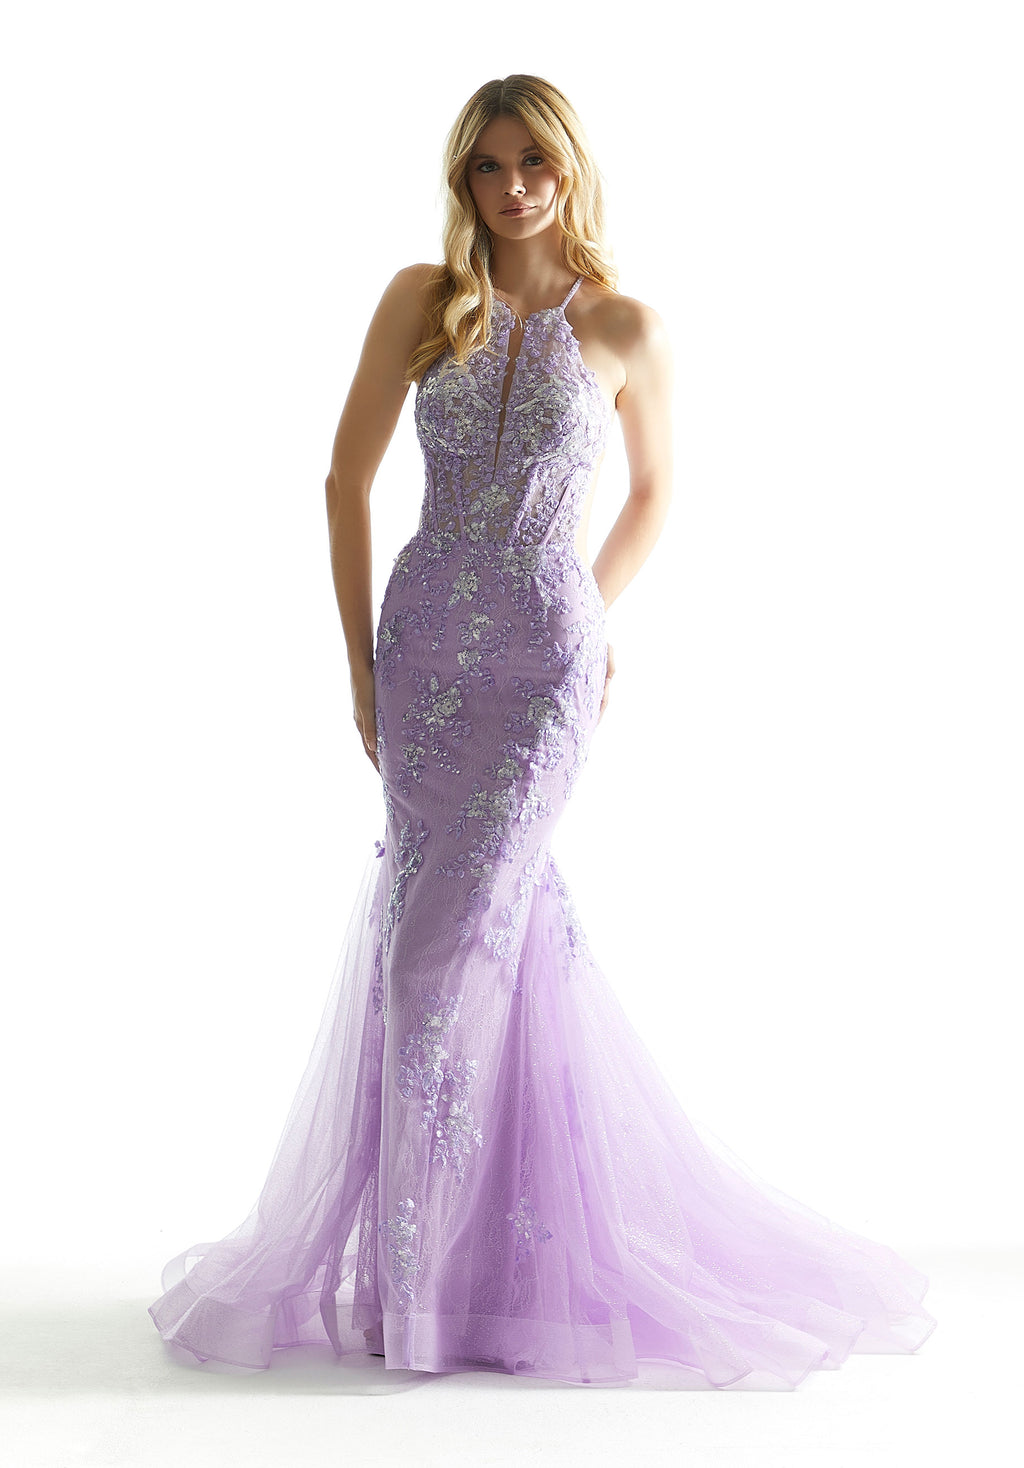 Red carpet ready, this astonishing mermaid Morilee gown 49073 will mesmerize all in sight. Showcasing a sophisticated high halter neckline, sheer midriff panels accentuate your figure beautifully. Flattering on all the lace up closure defines your figure, highlighting your hourglass silhouette. Gleaming beaded appliques adorn the entire silhouette giving this gown the perfect pop of glitz.